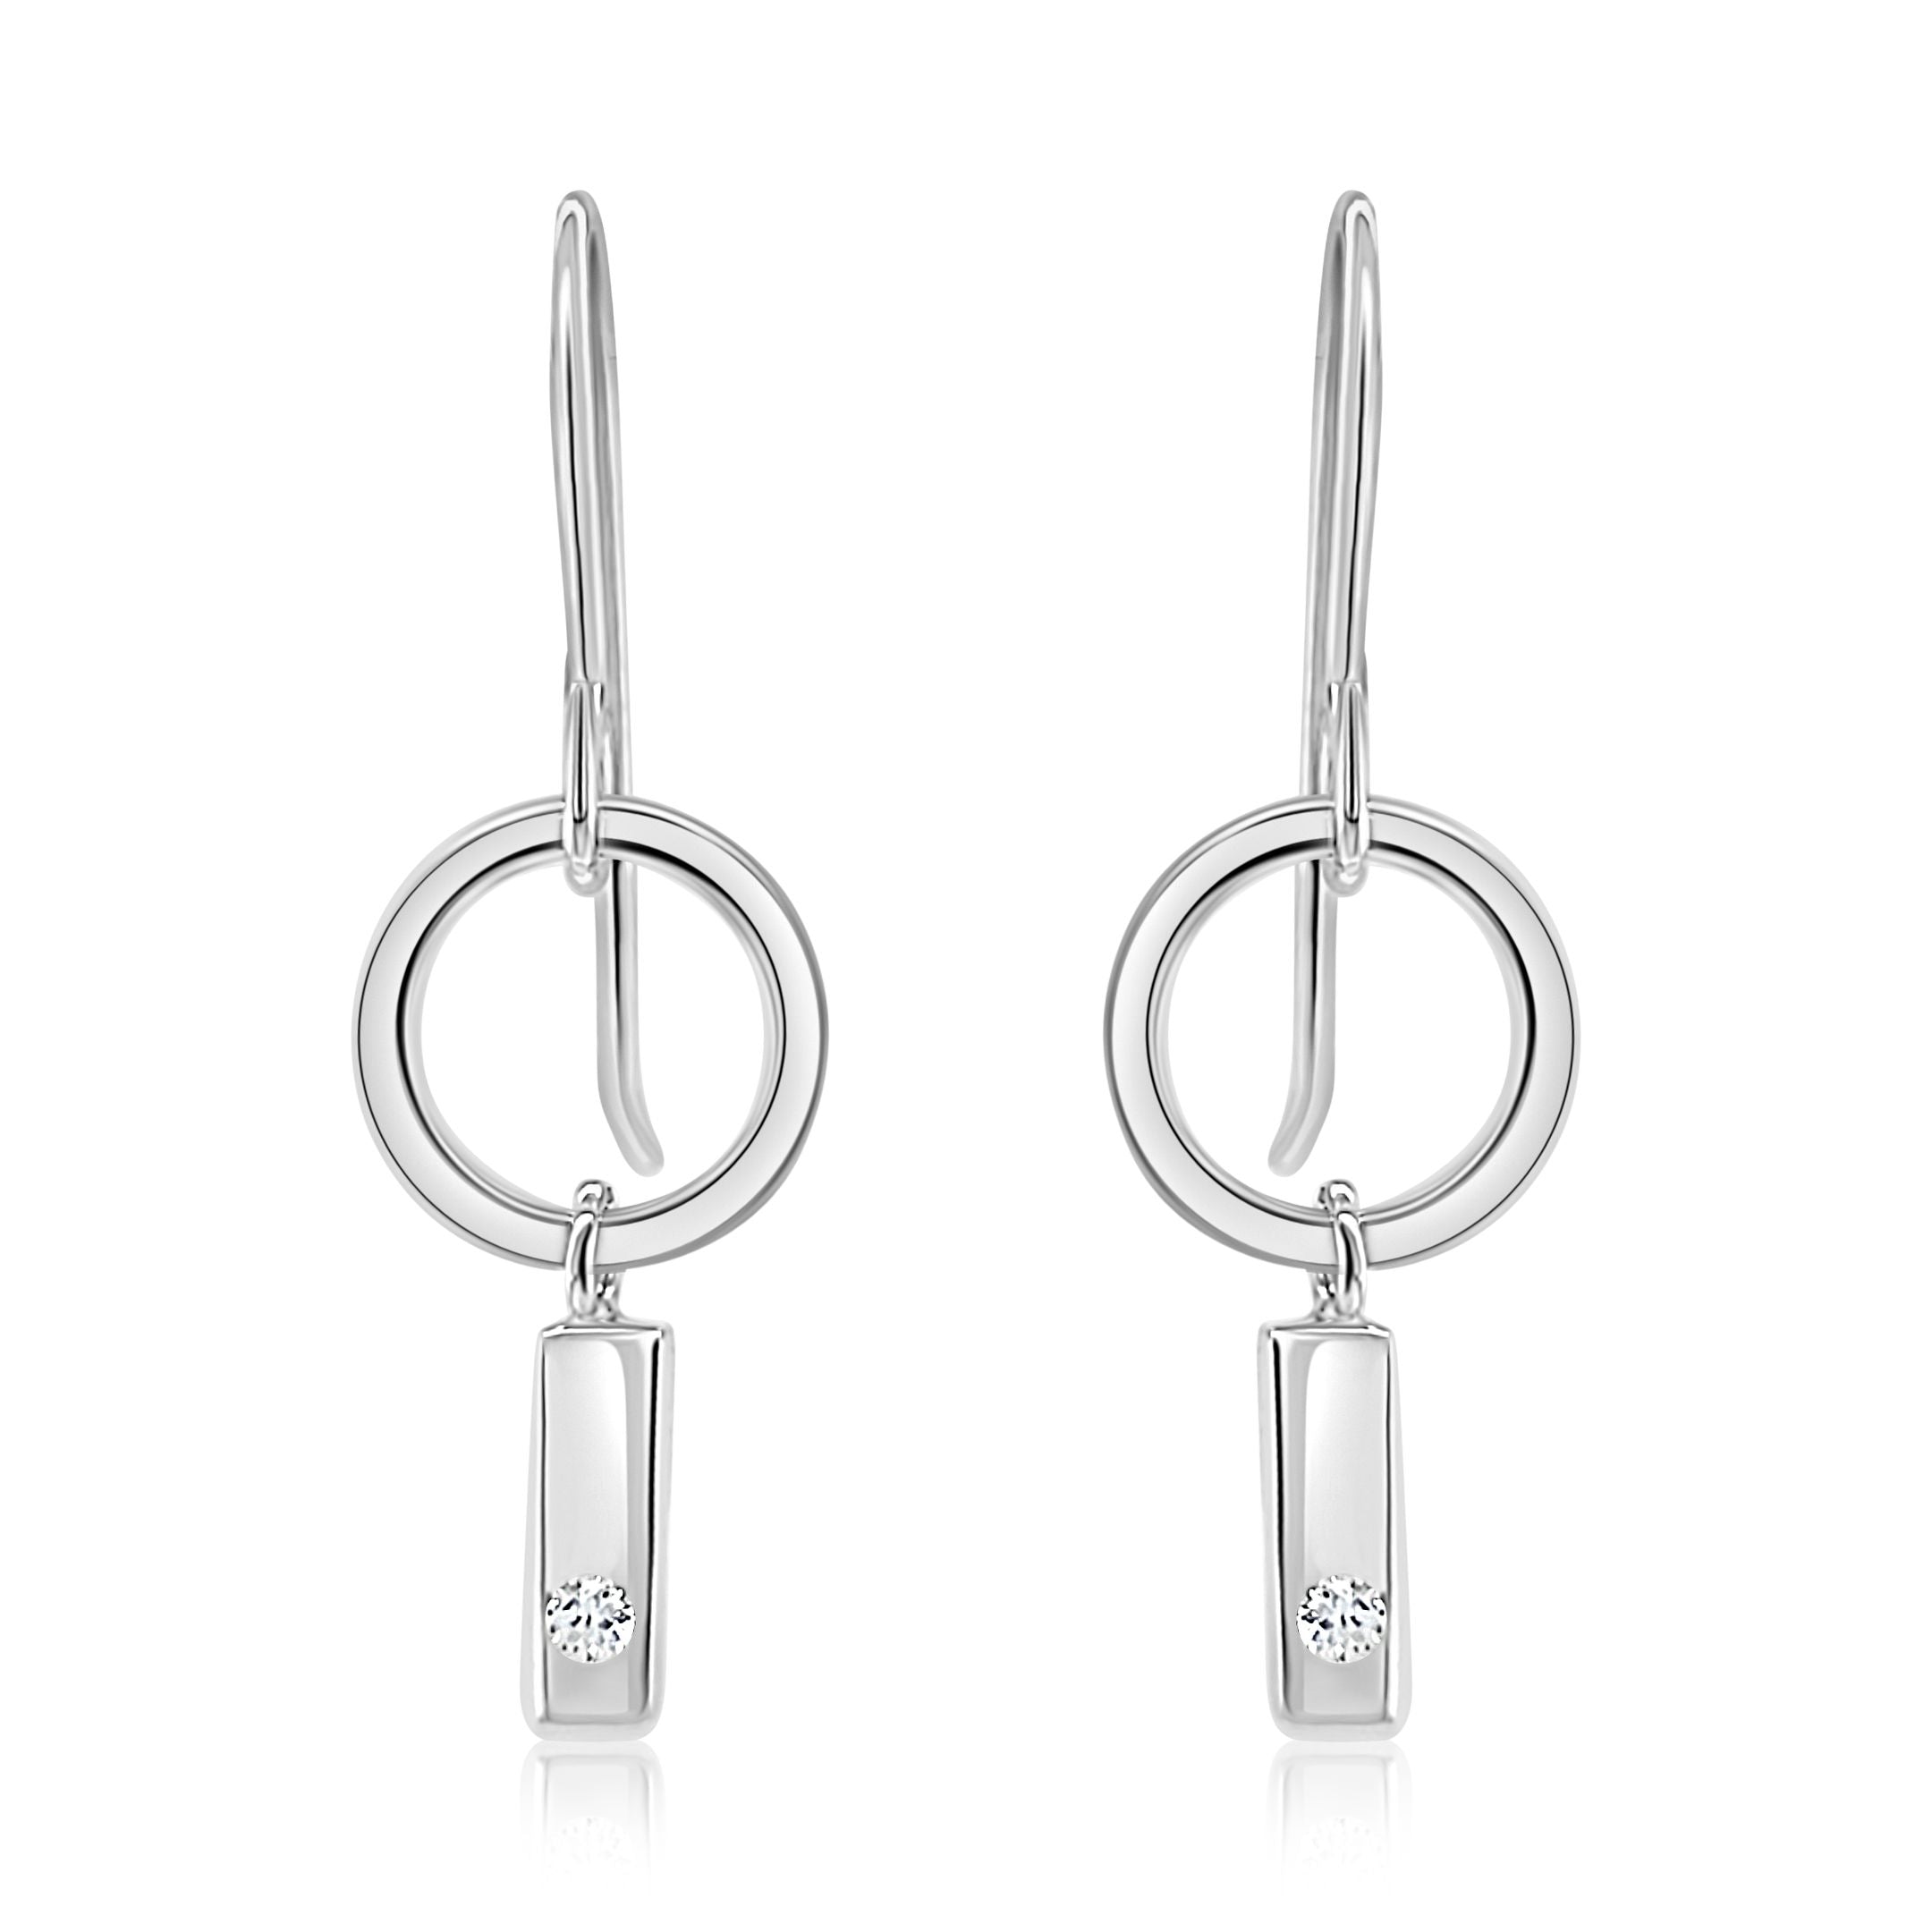 Beautiful Sterling Silver Circle Earrings with Flush Set Cubic Zirconia